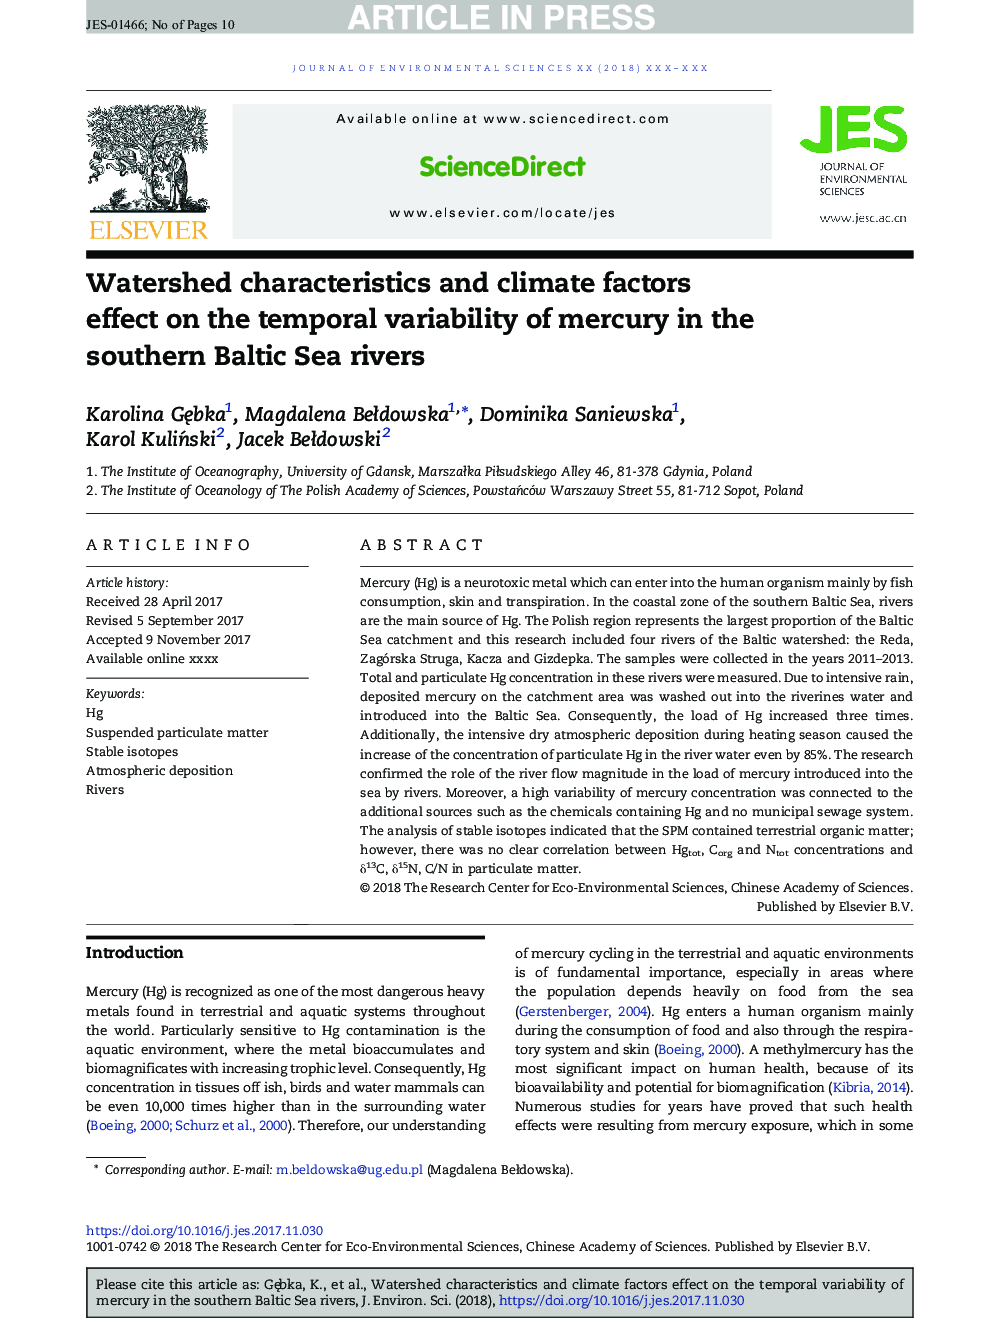 Watershed characteristics and climate factors effect on the temporal variability of mercury in the southern Baltic Sea rivers